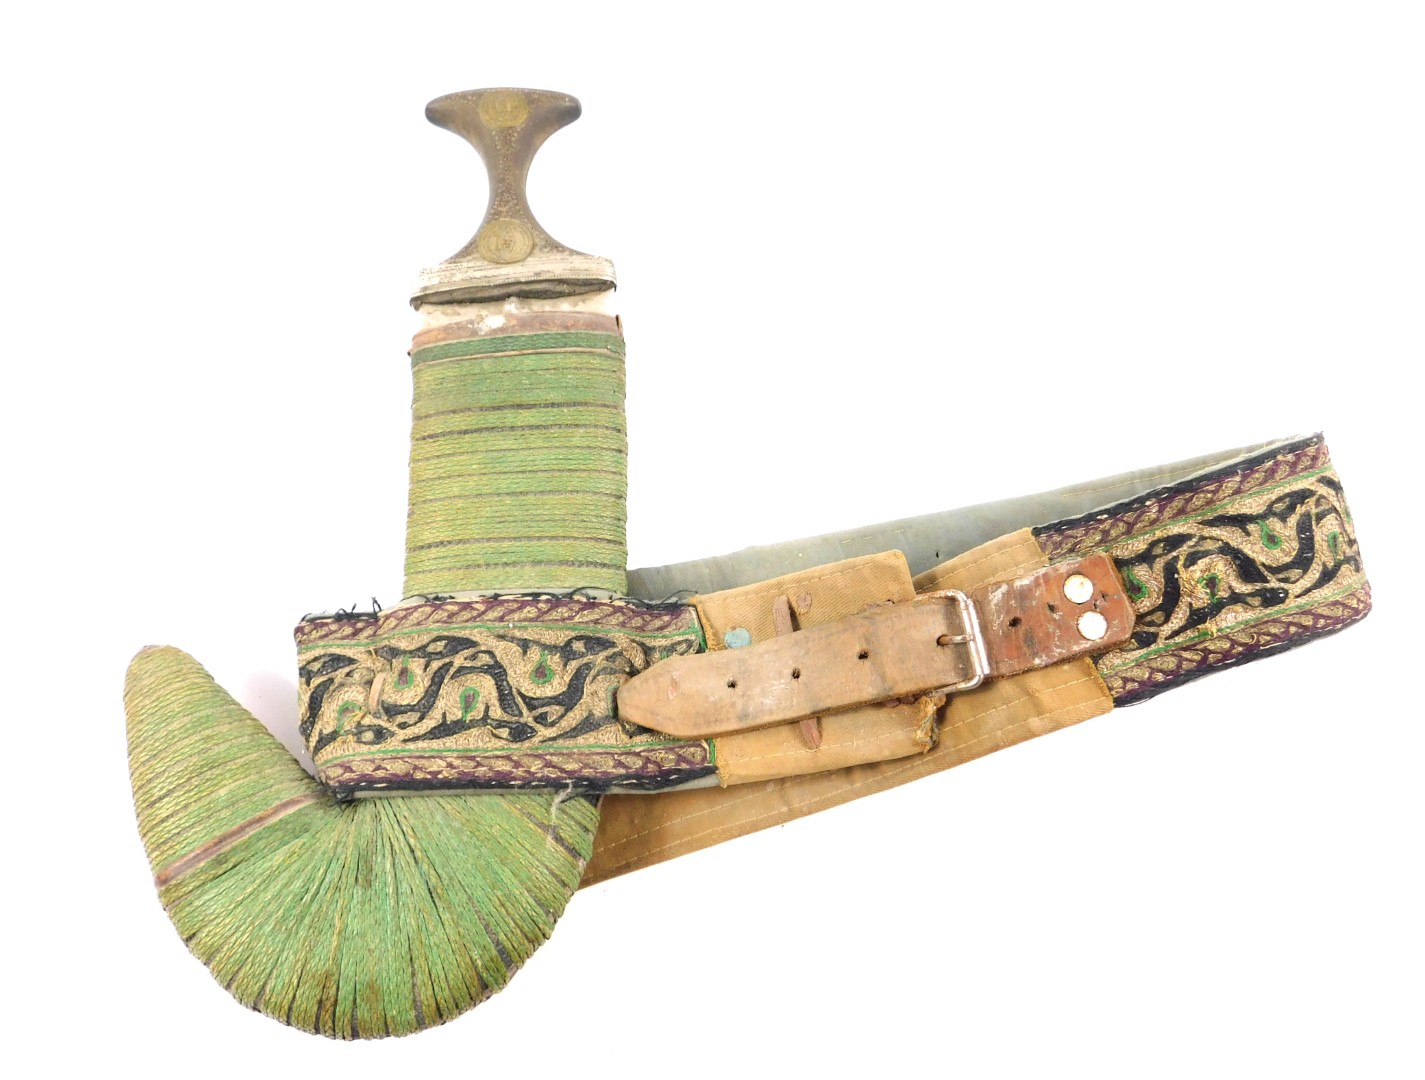 A Yemeni Jambiya, the horn hilt with metal embellishments, double edged steel blade and Asib leather